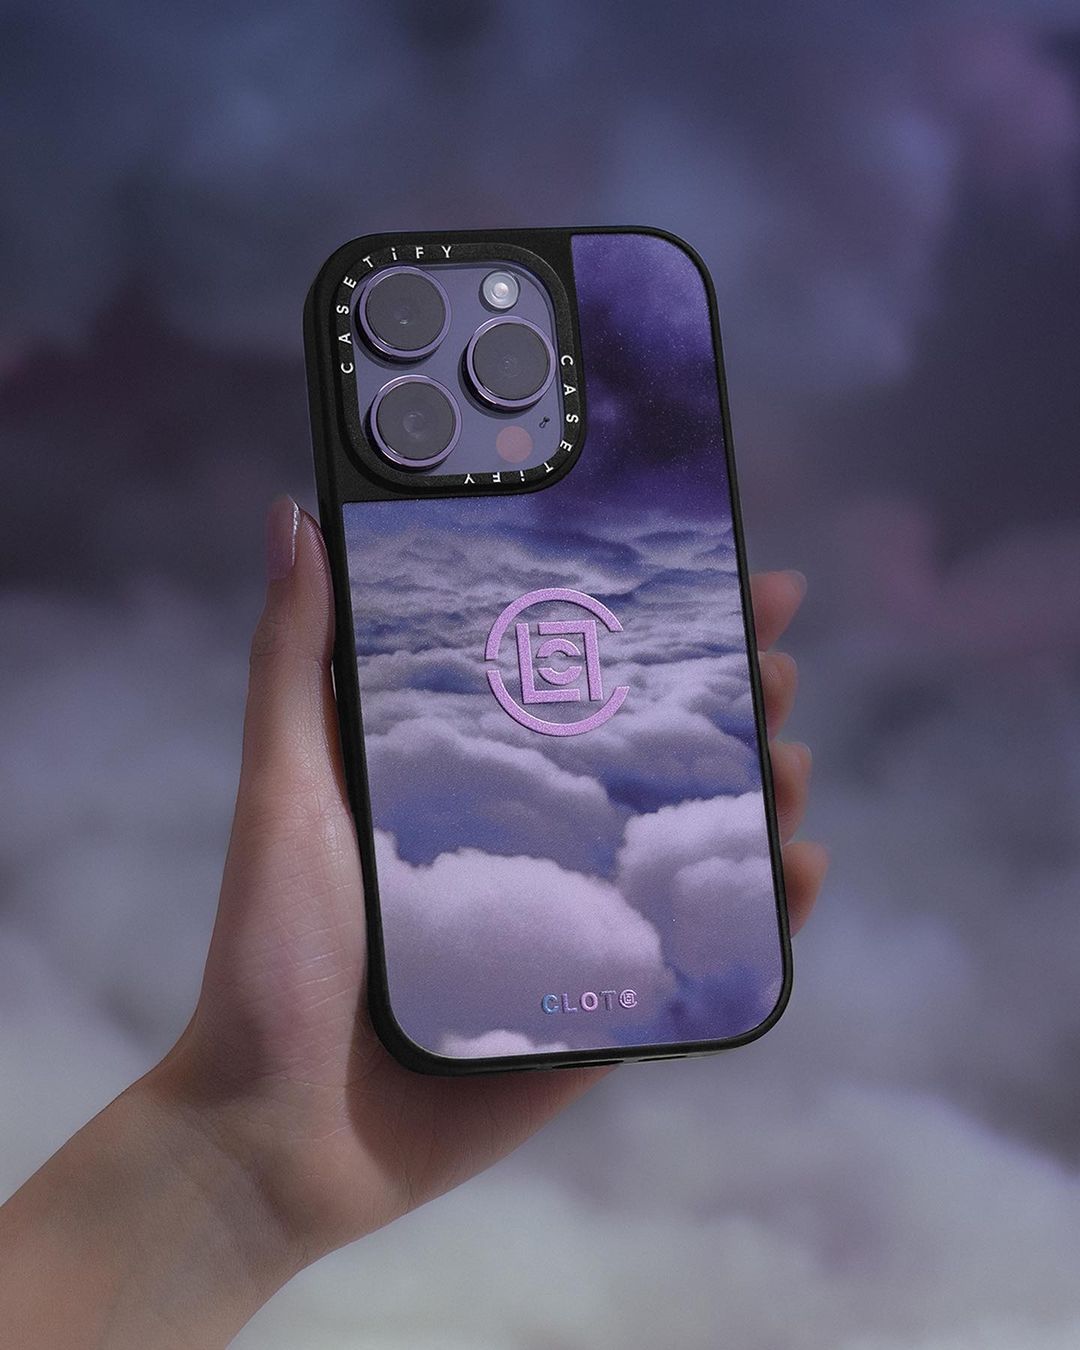 THE NORTH FACE × CLOT 20th x CASETiFY iPhone Case (ザ・ノース・フェイス クロット 20周年 ケースティファイ アイフォン ケース)